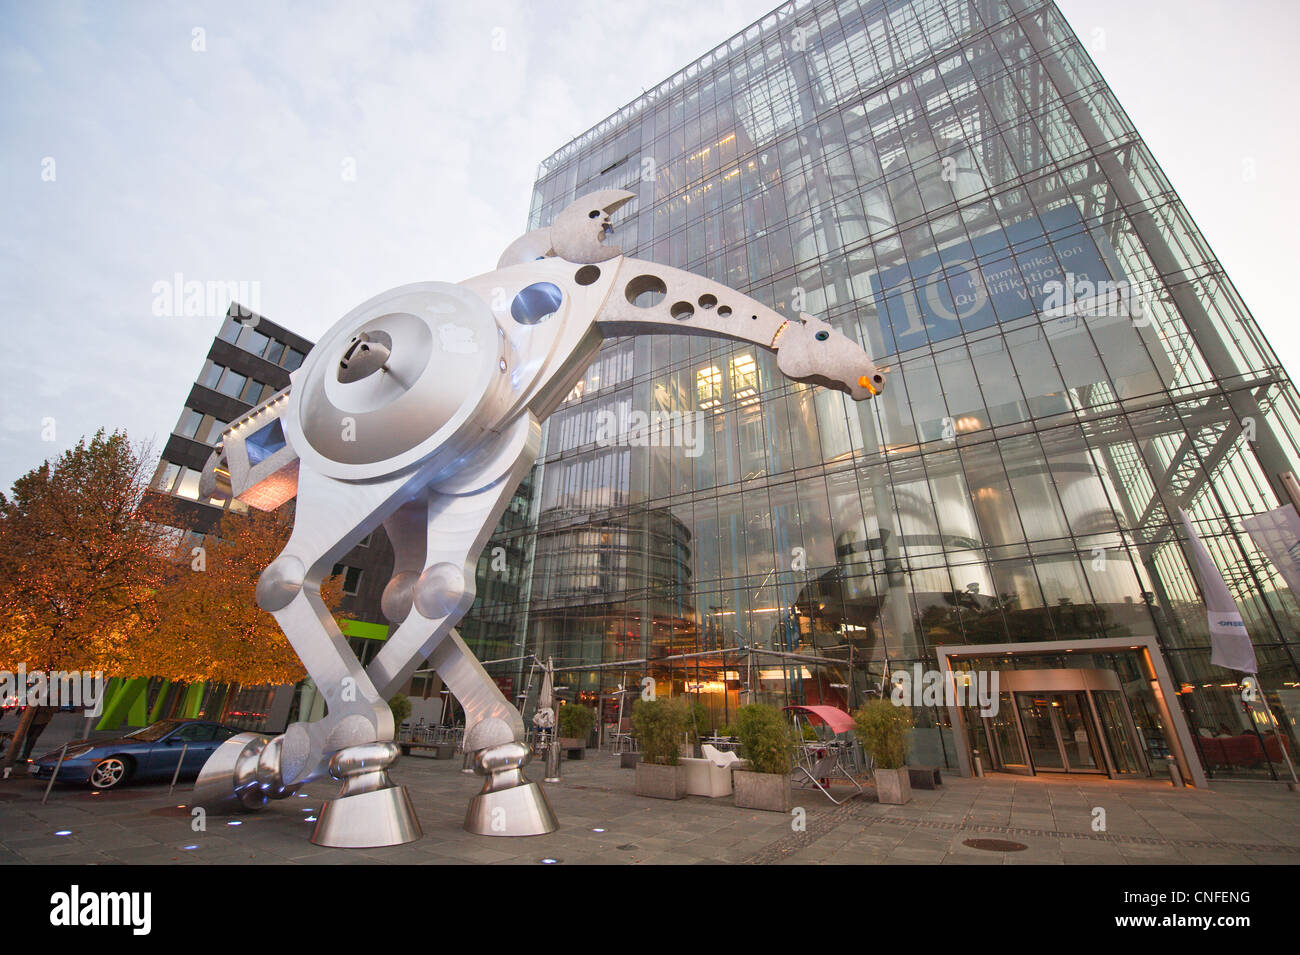 The 'S-Printing Horse' sculpture at the Print Media Academy, Heidelberg, Germany. Stock Photo